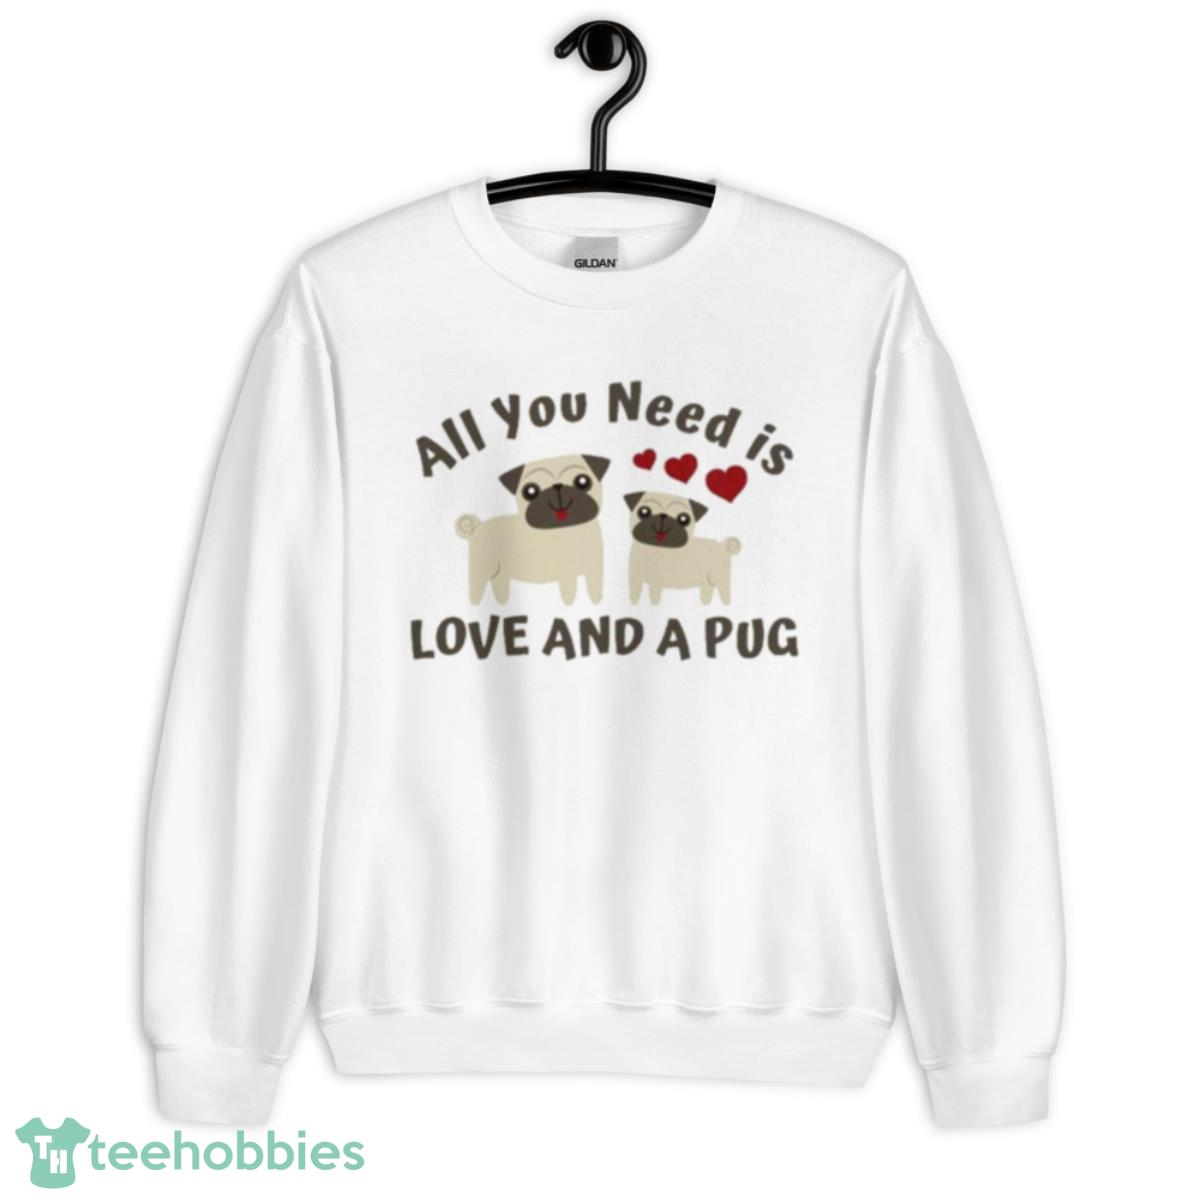 All You Need Is Love And A Pug Shirt - Unisex Heavy Blend Crewneck Sweatshirt